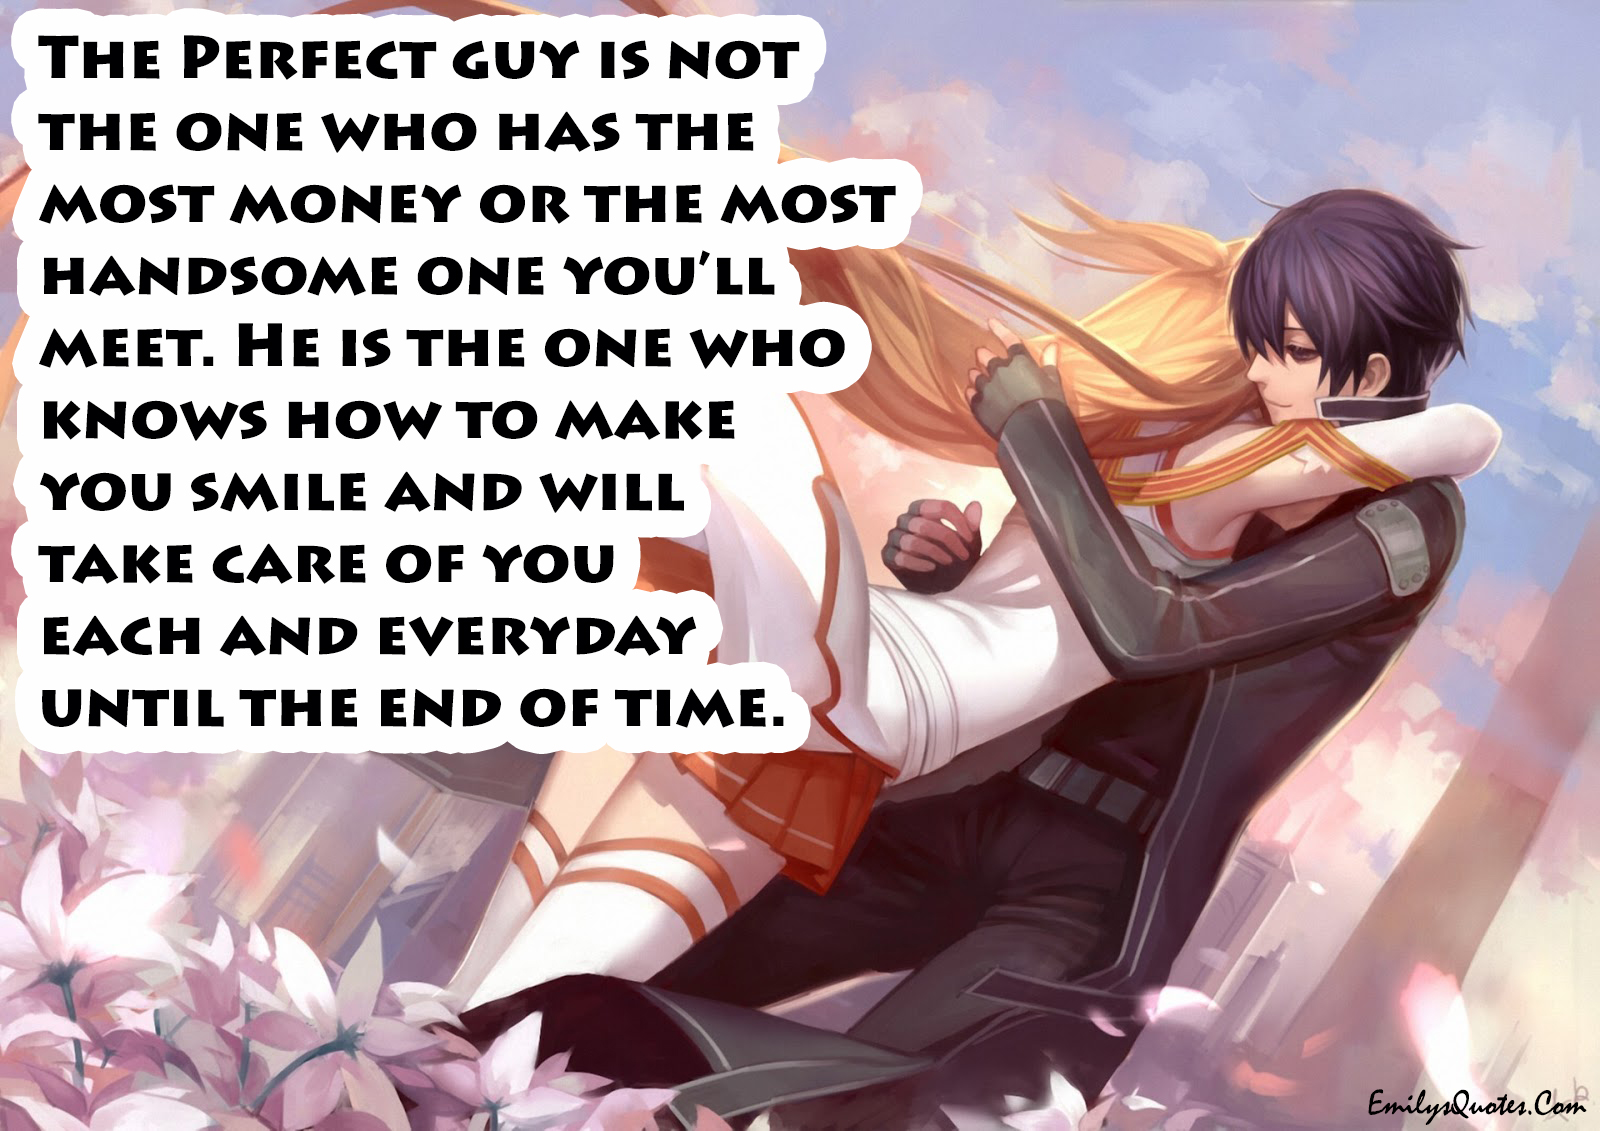 The Perfect guy is not the one who has